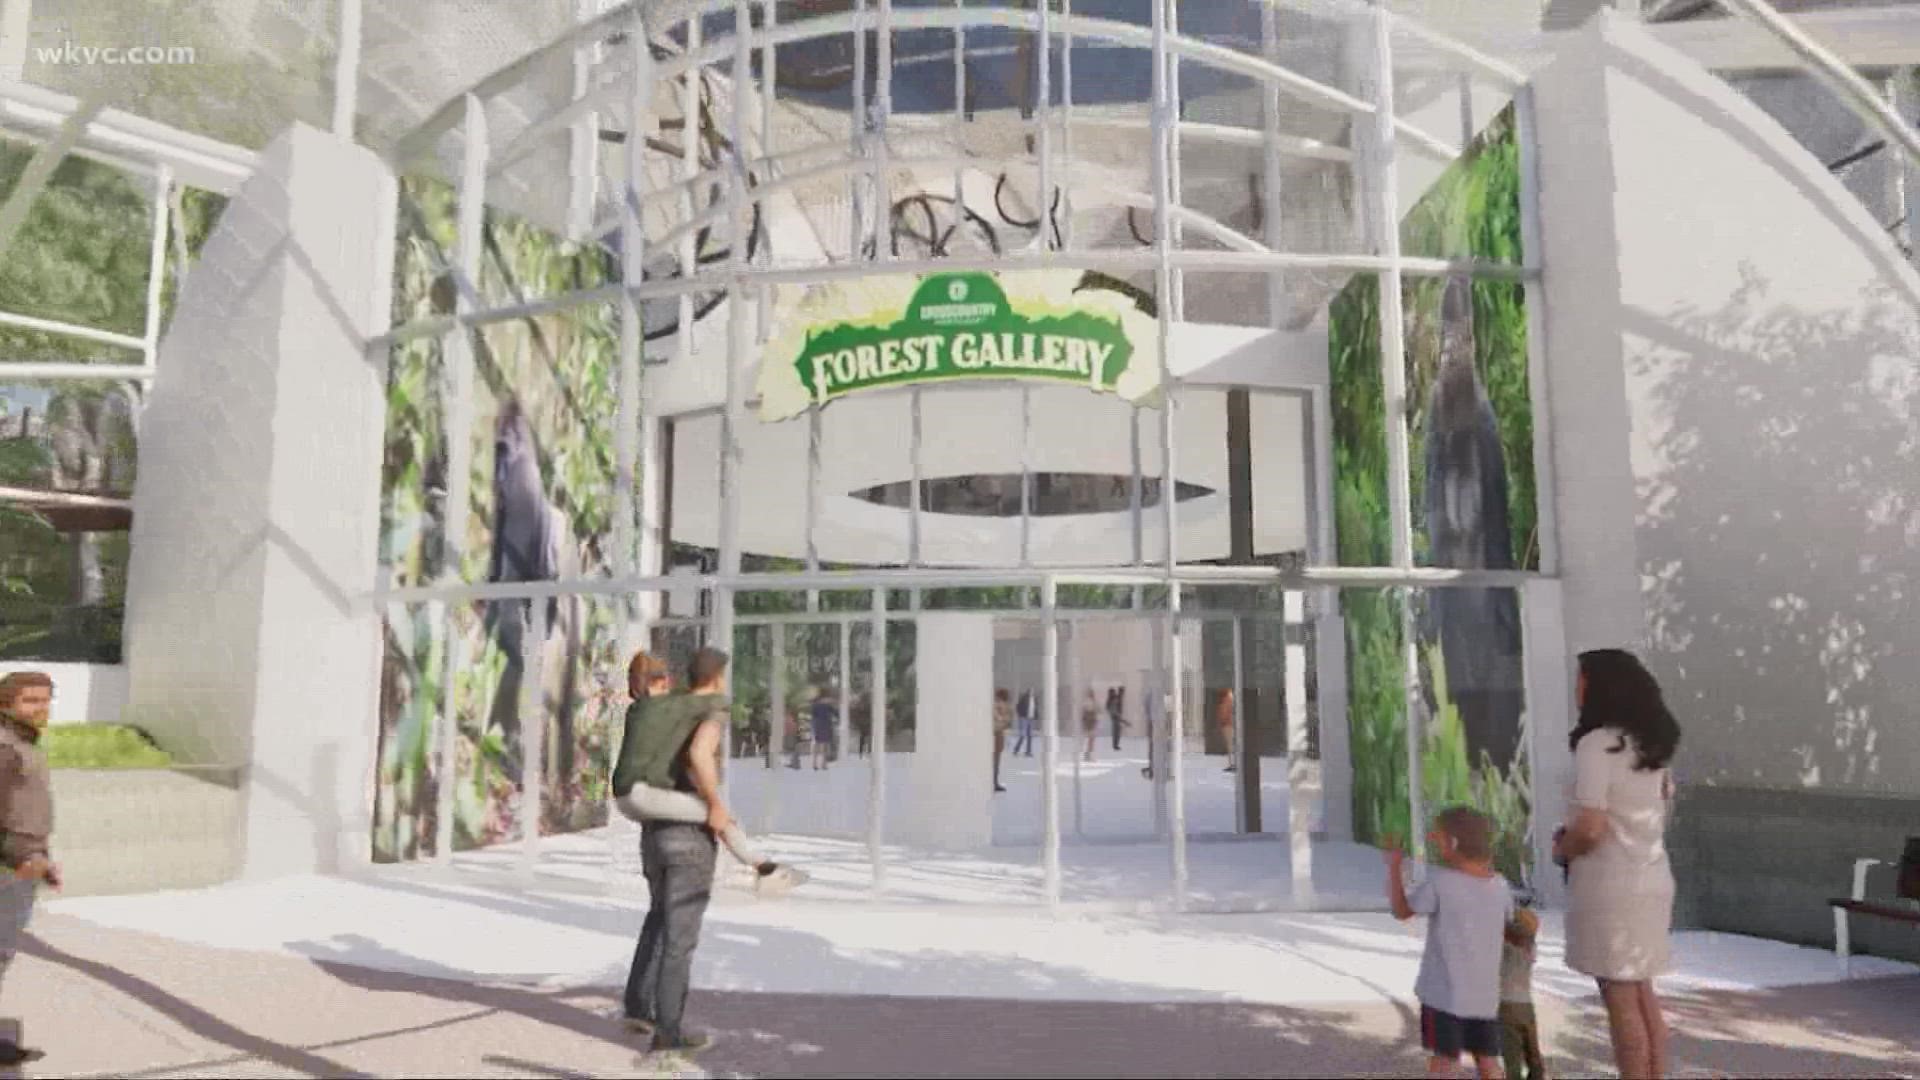 Amani Abraham brings us more on on the upcoming new home for the park's gorillas and orangutans